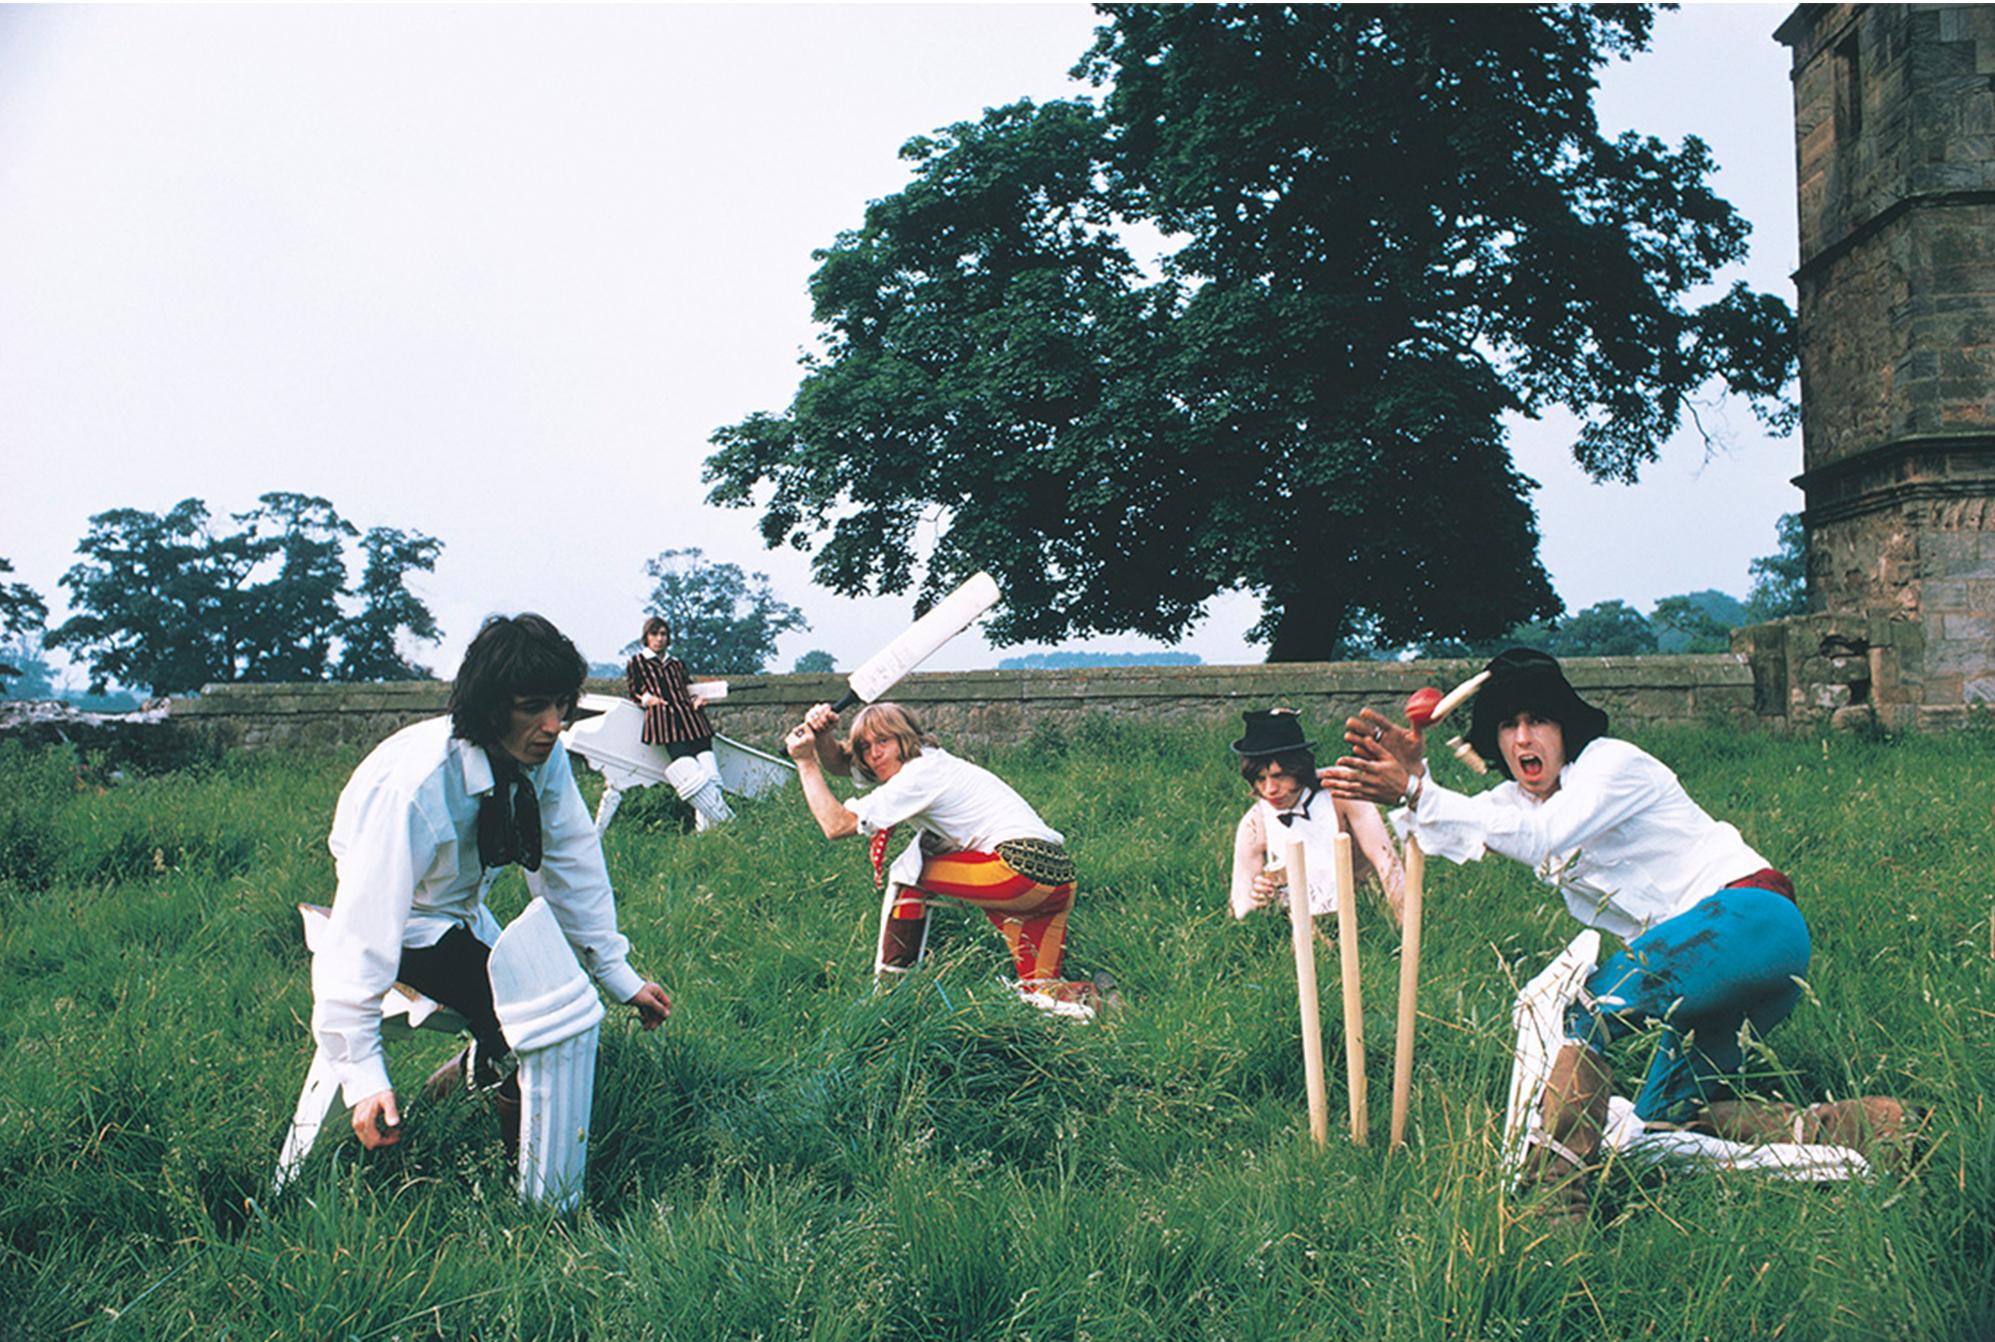 Michael Joseph Color Photograph - The Rolling Stones "Stones Playing Cricket" London 1968